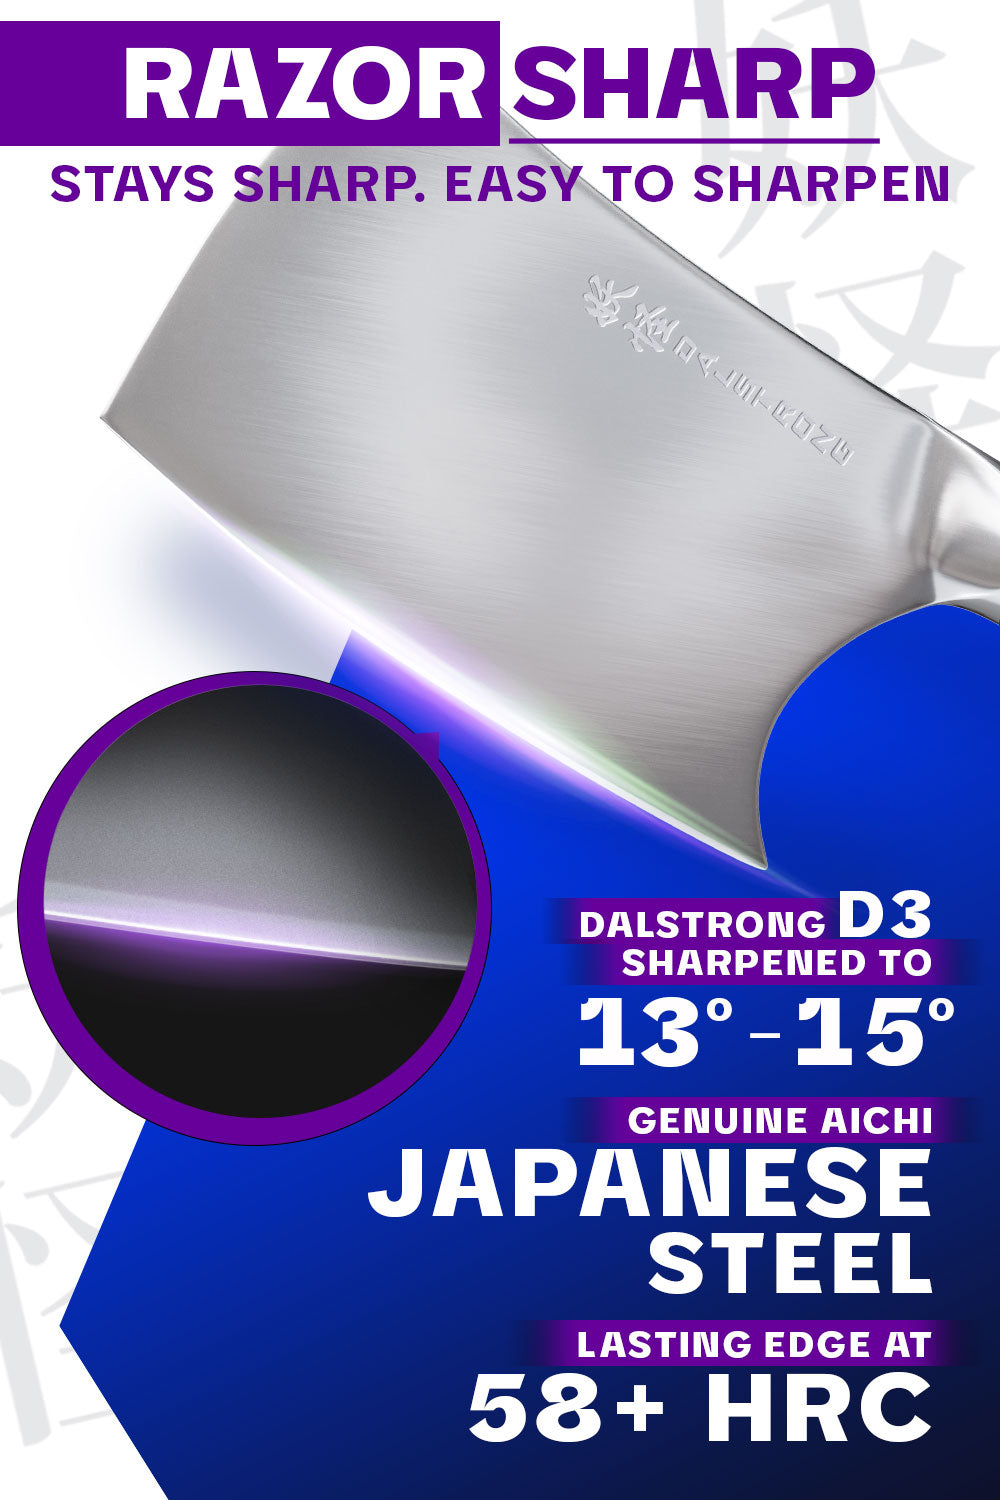 Dalstrong phantom series 4.5 inch cleaver knife with pakka wood handle featuring it's razor sharp japanese steel blade.